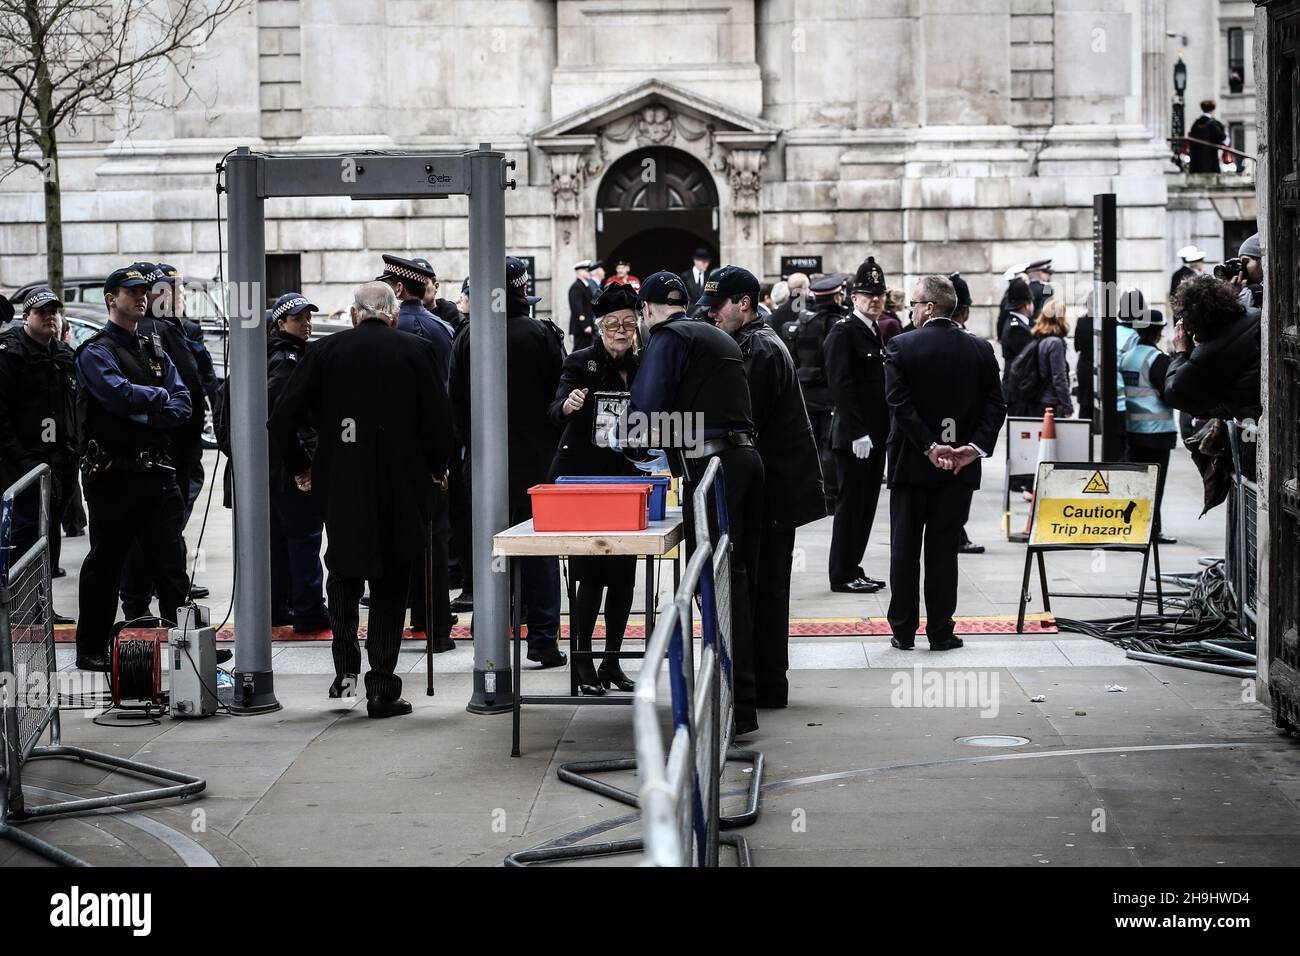 Police search bags prior to the funeral of Baroness Thatcher at St Paul's Cathedral in London.  Stock Photo